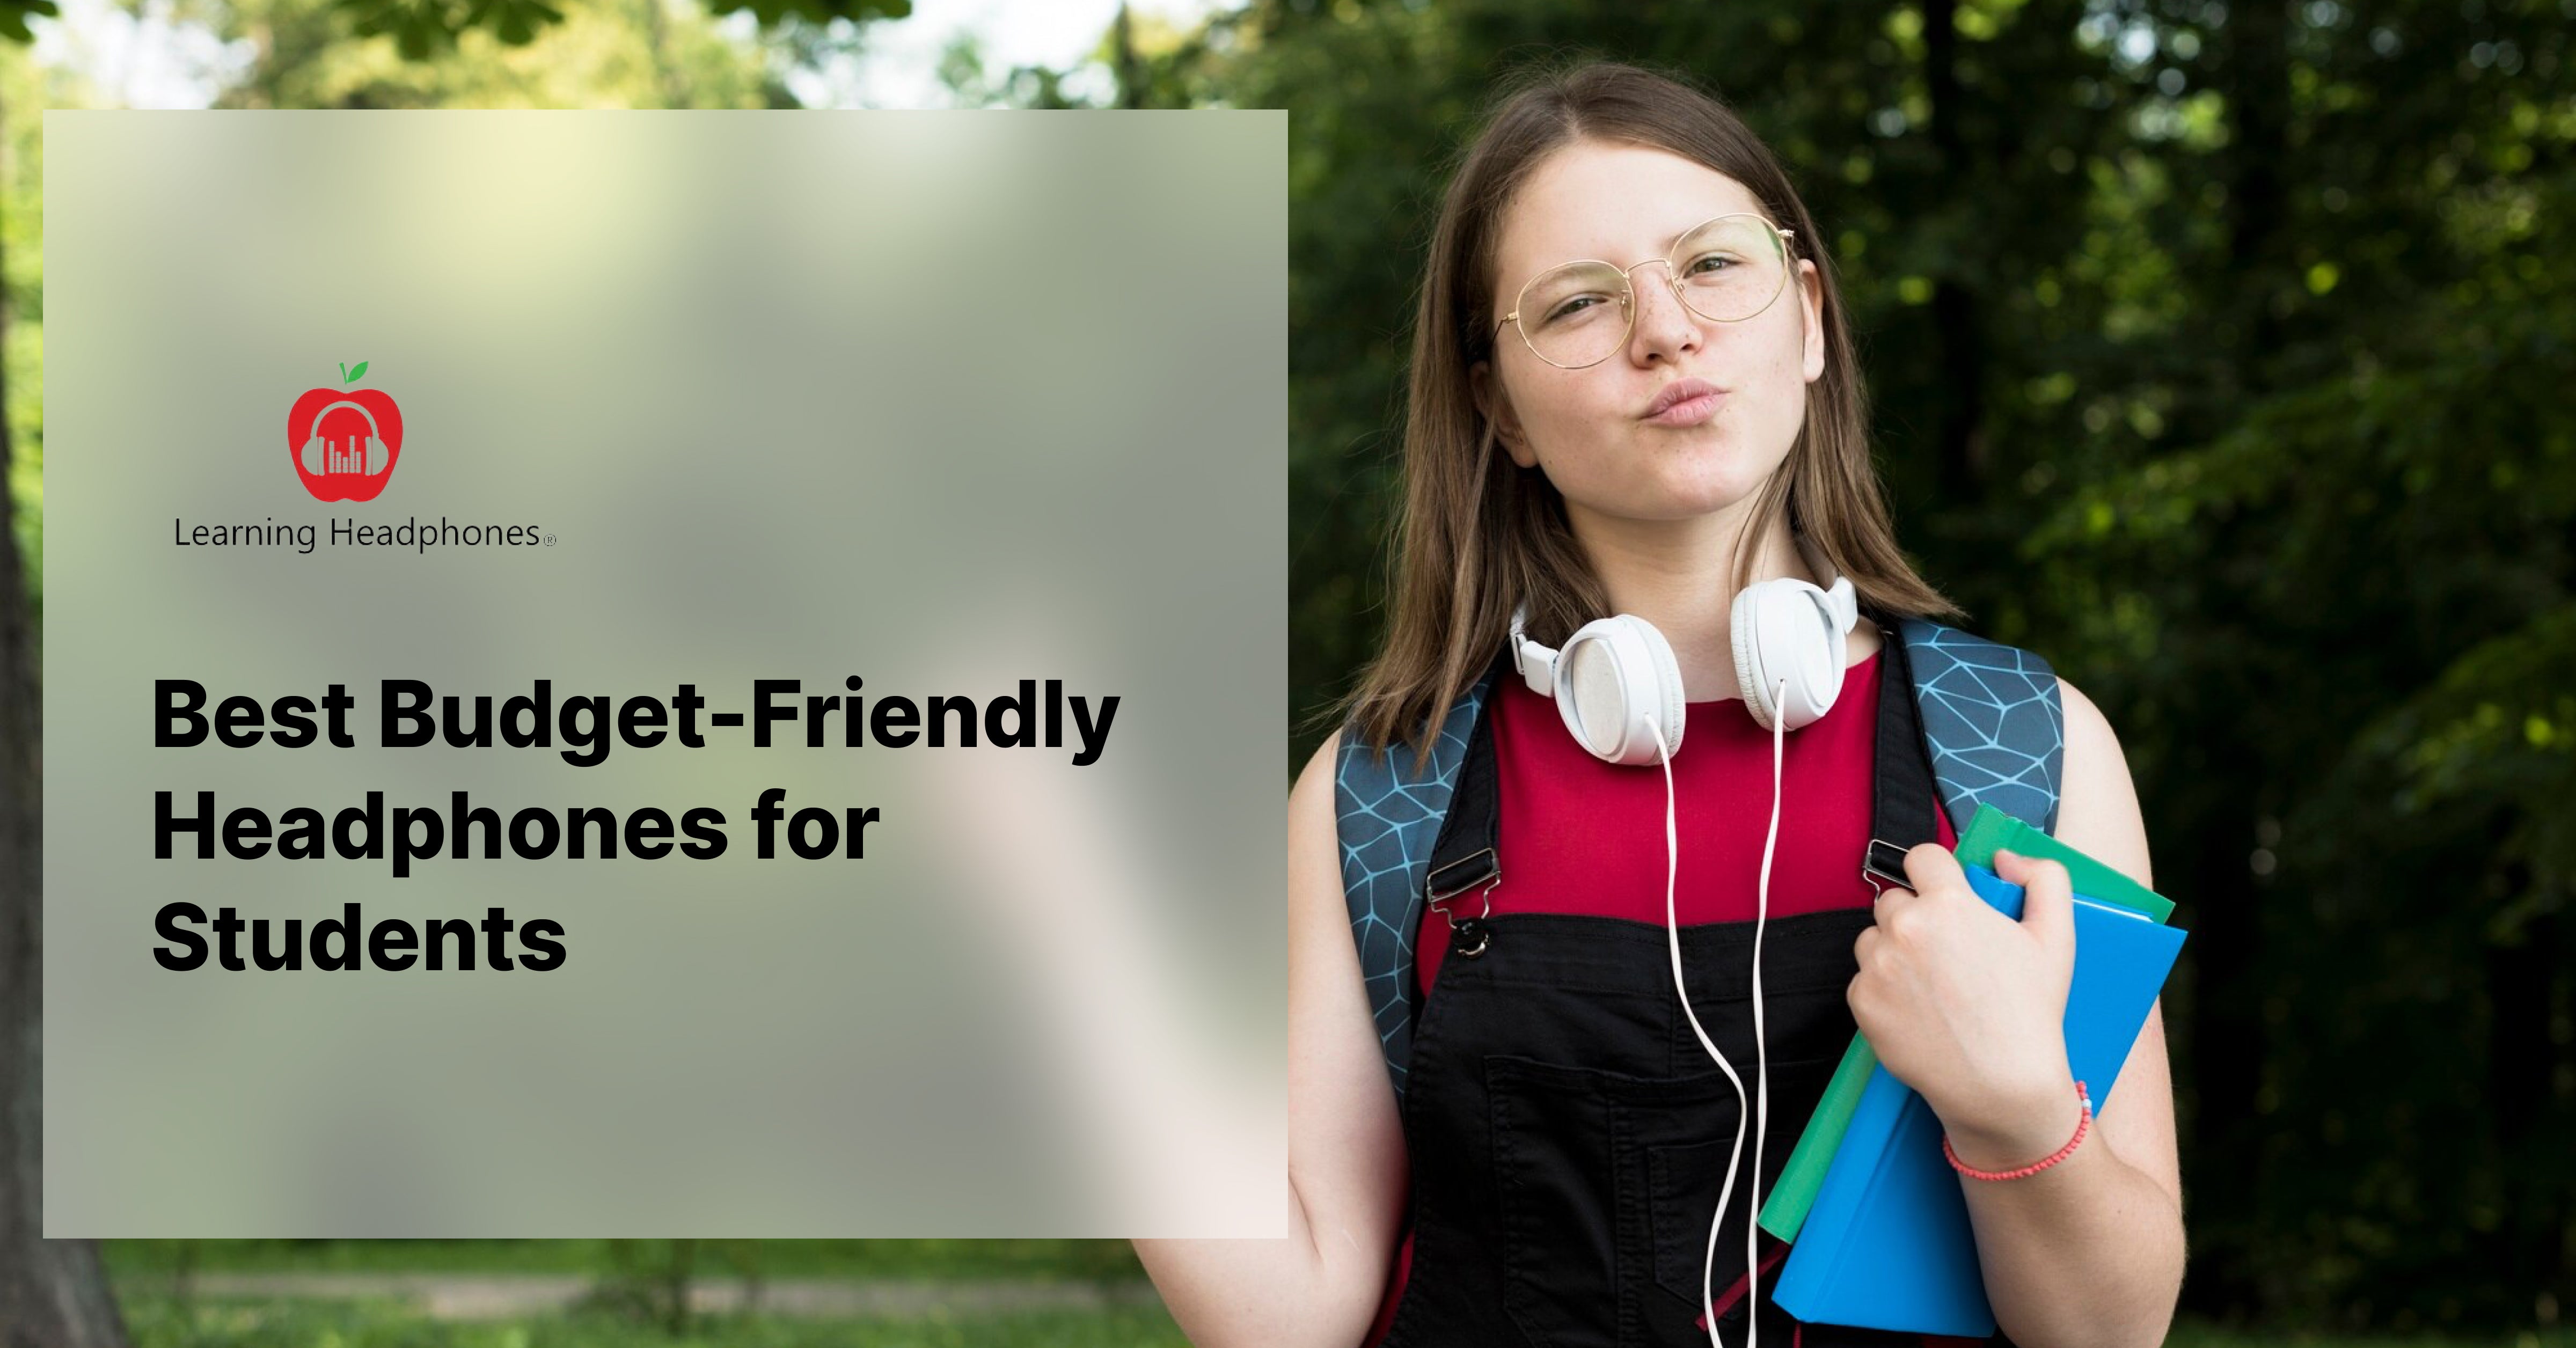 Best Budget-Friendly Headphones for Students